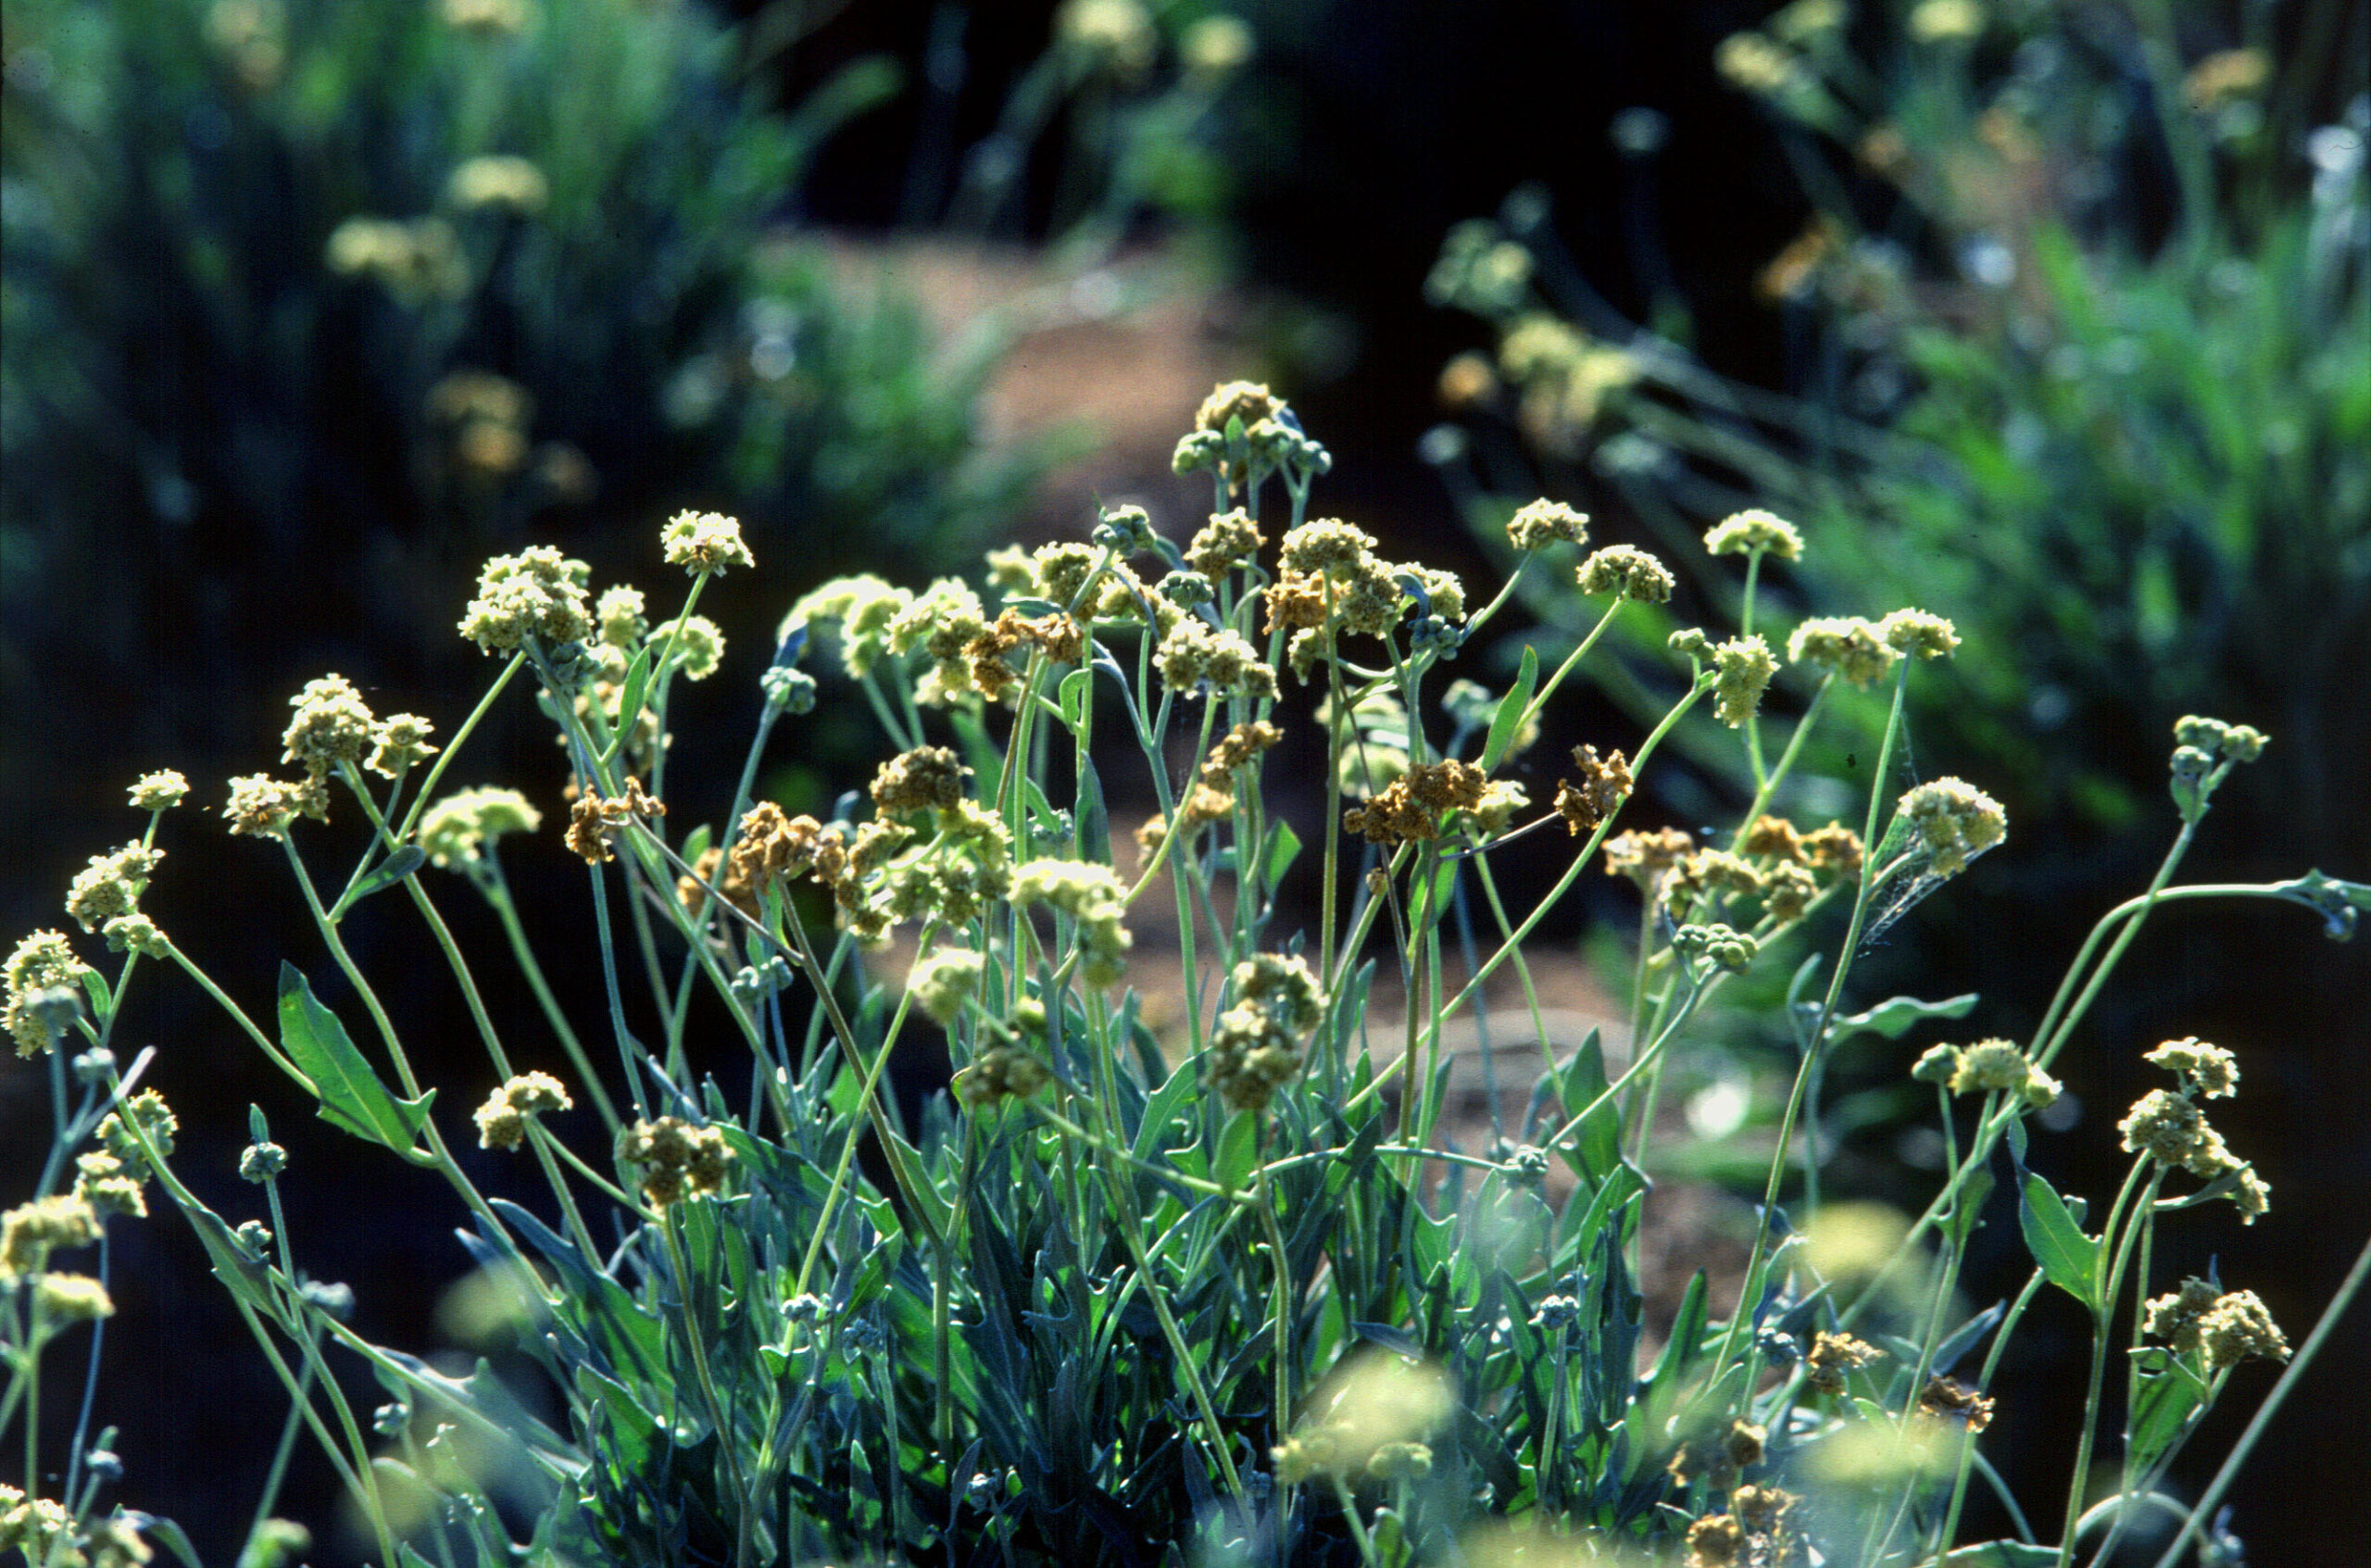 To save water, Arizona farmers are growing guayule for sustainable tires